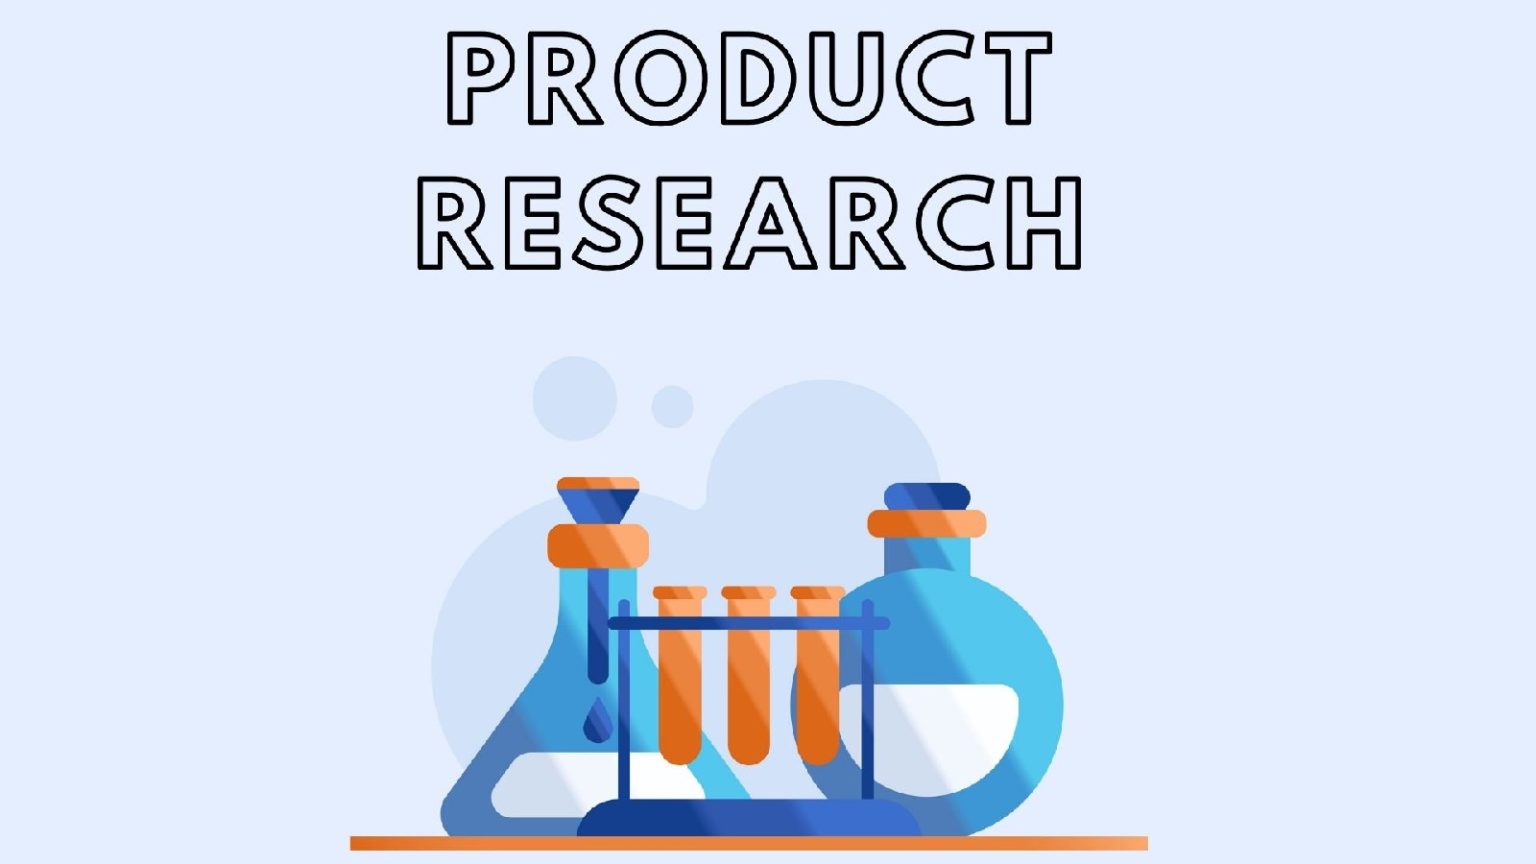 new product research definition